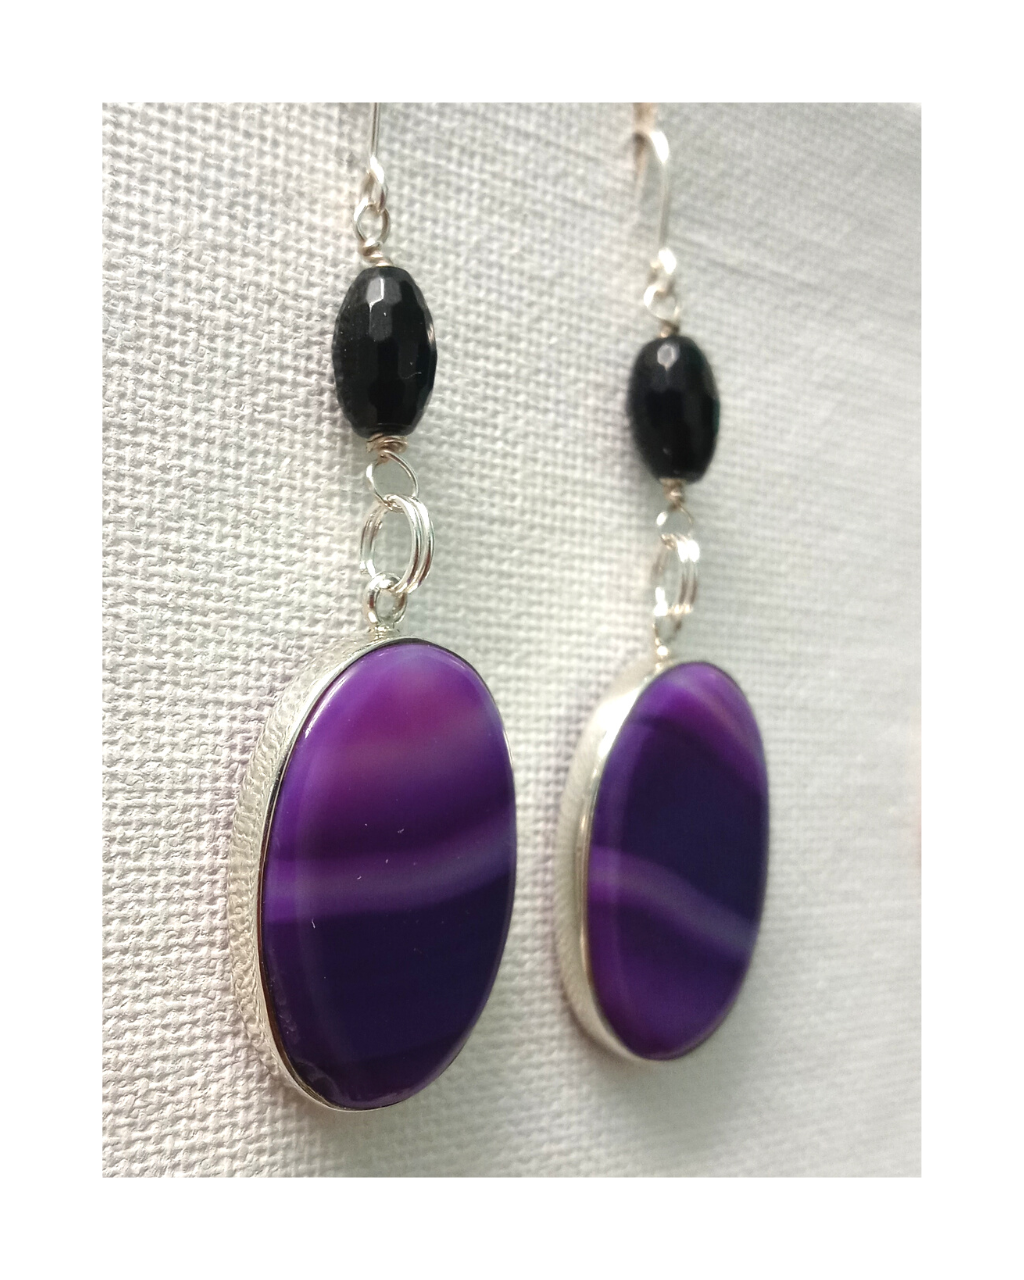 Exclusive Beautiful Sterling Purple Agate and Faceted Black Onyx Earrings 2 9/16"L X 1 7/8"W ONE ONLY